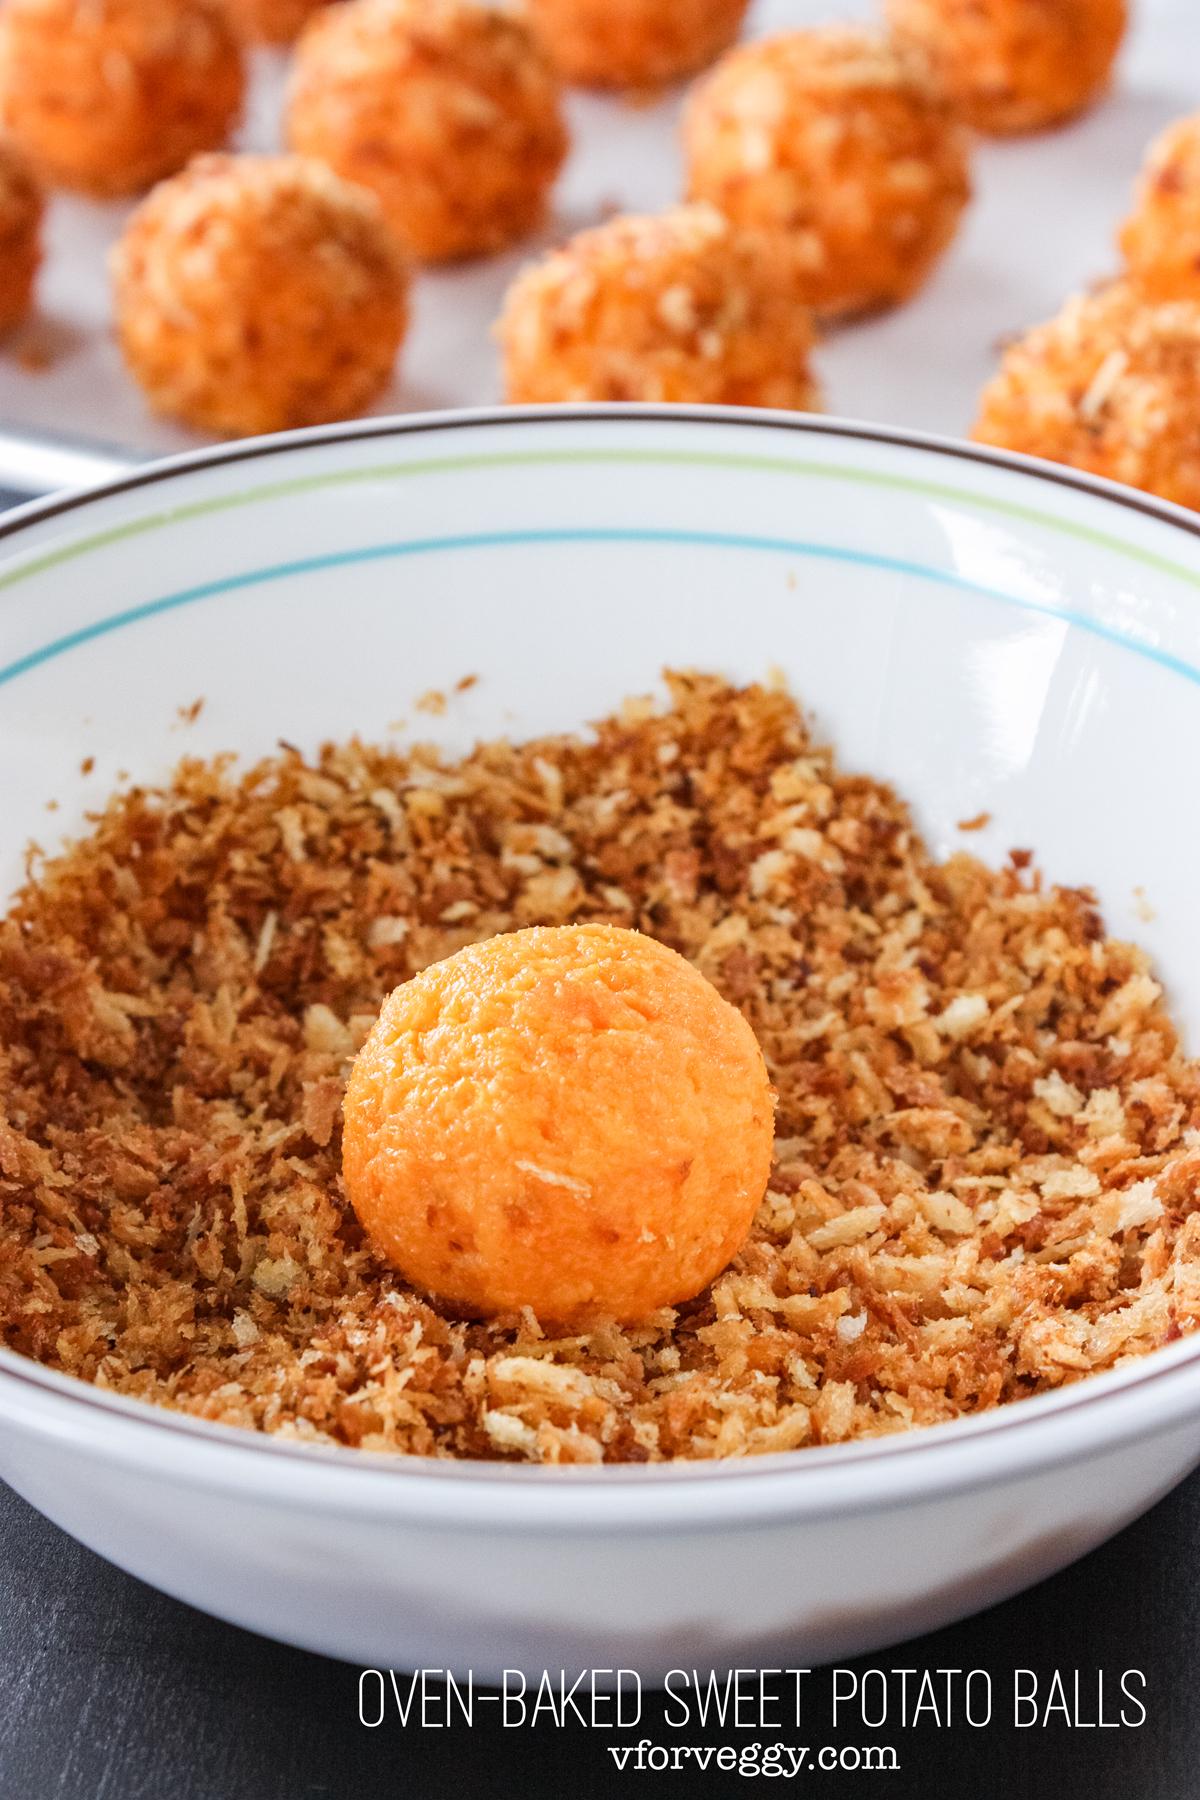 Oven baked sweet potato balls, with only 3 ingredients: sweet potato, cheddar cheese, and panko.